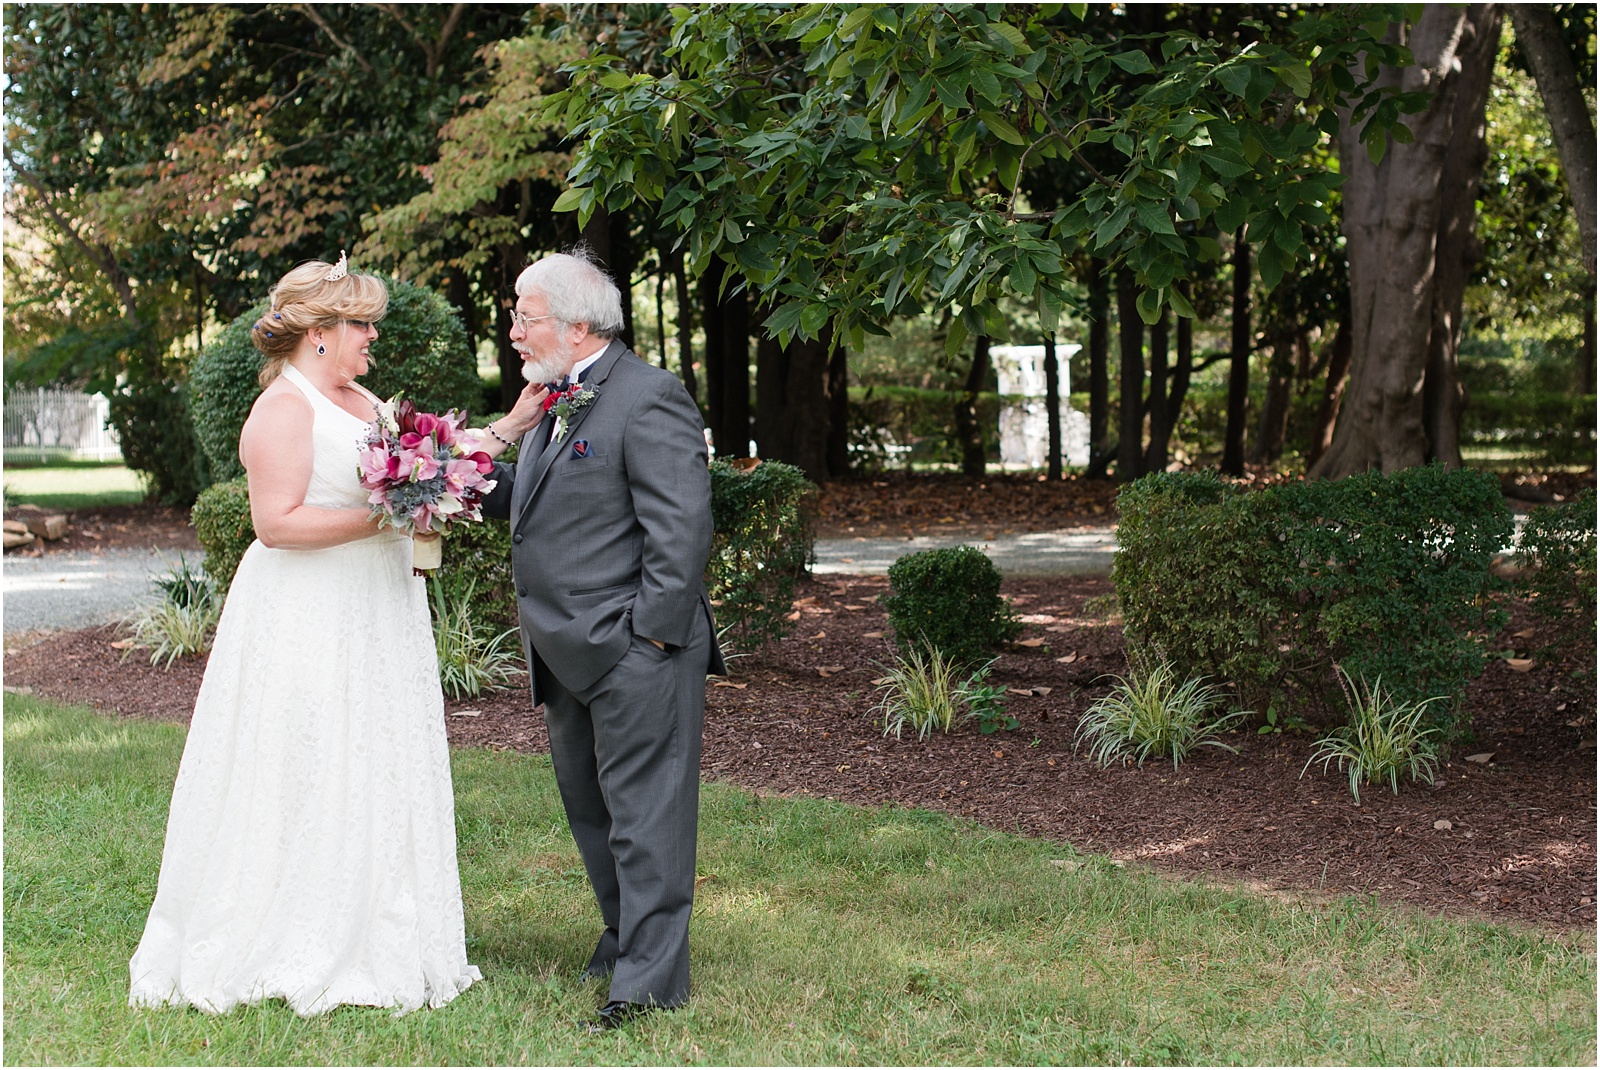 Michelle and Sara Photography, Michelle and Sara weddings, michelle robinson photography, burke manor inn, first look, bride and groom first look